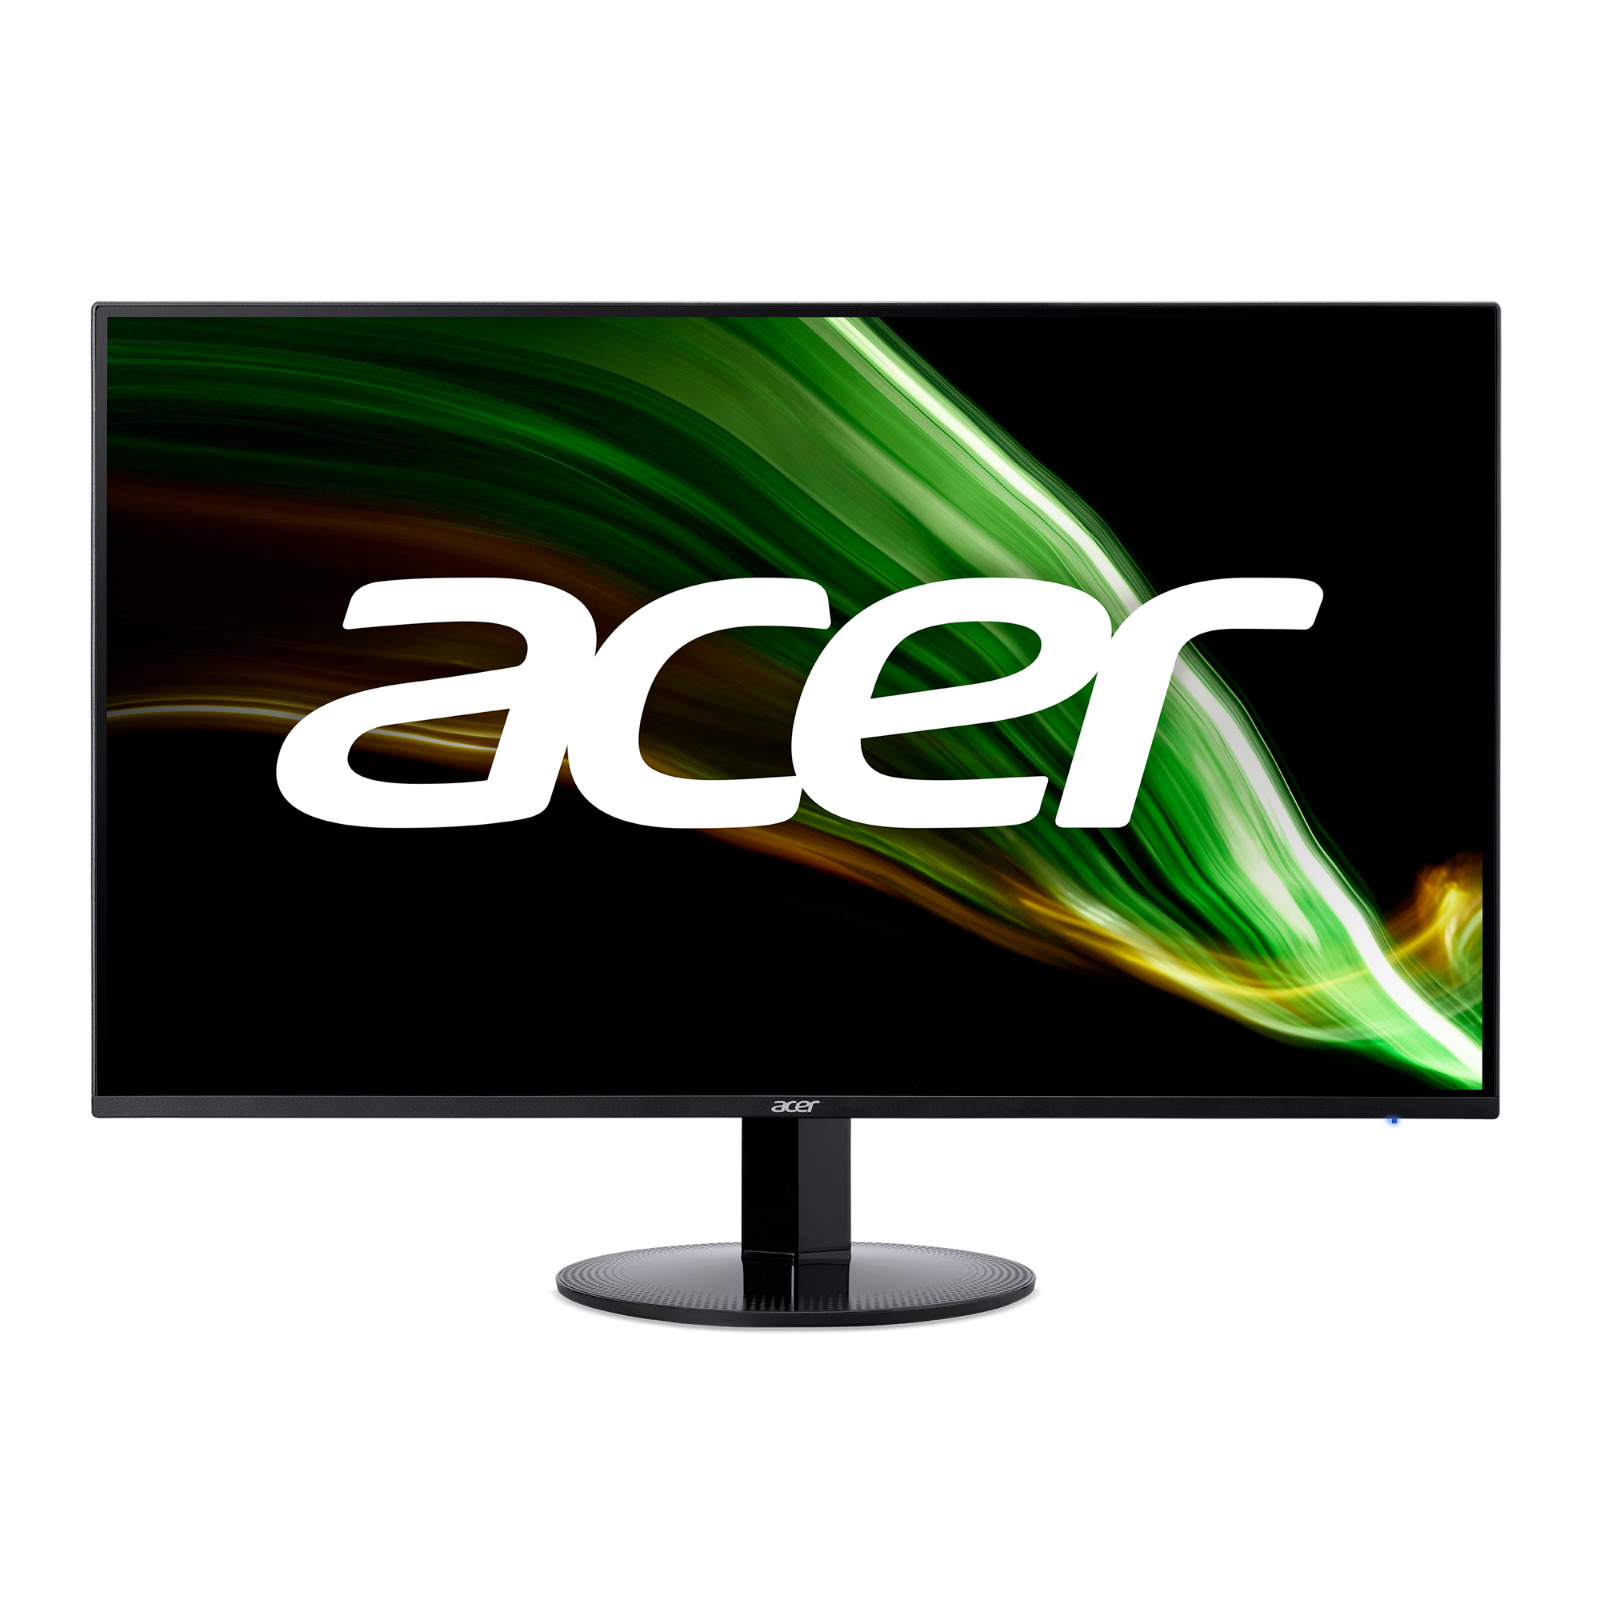 Acer 24” FHD Ultra-Thin IPS Monitor with AMD FreeSync, 75Hz, 1ms Good for Gaming